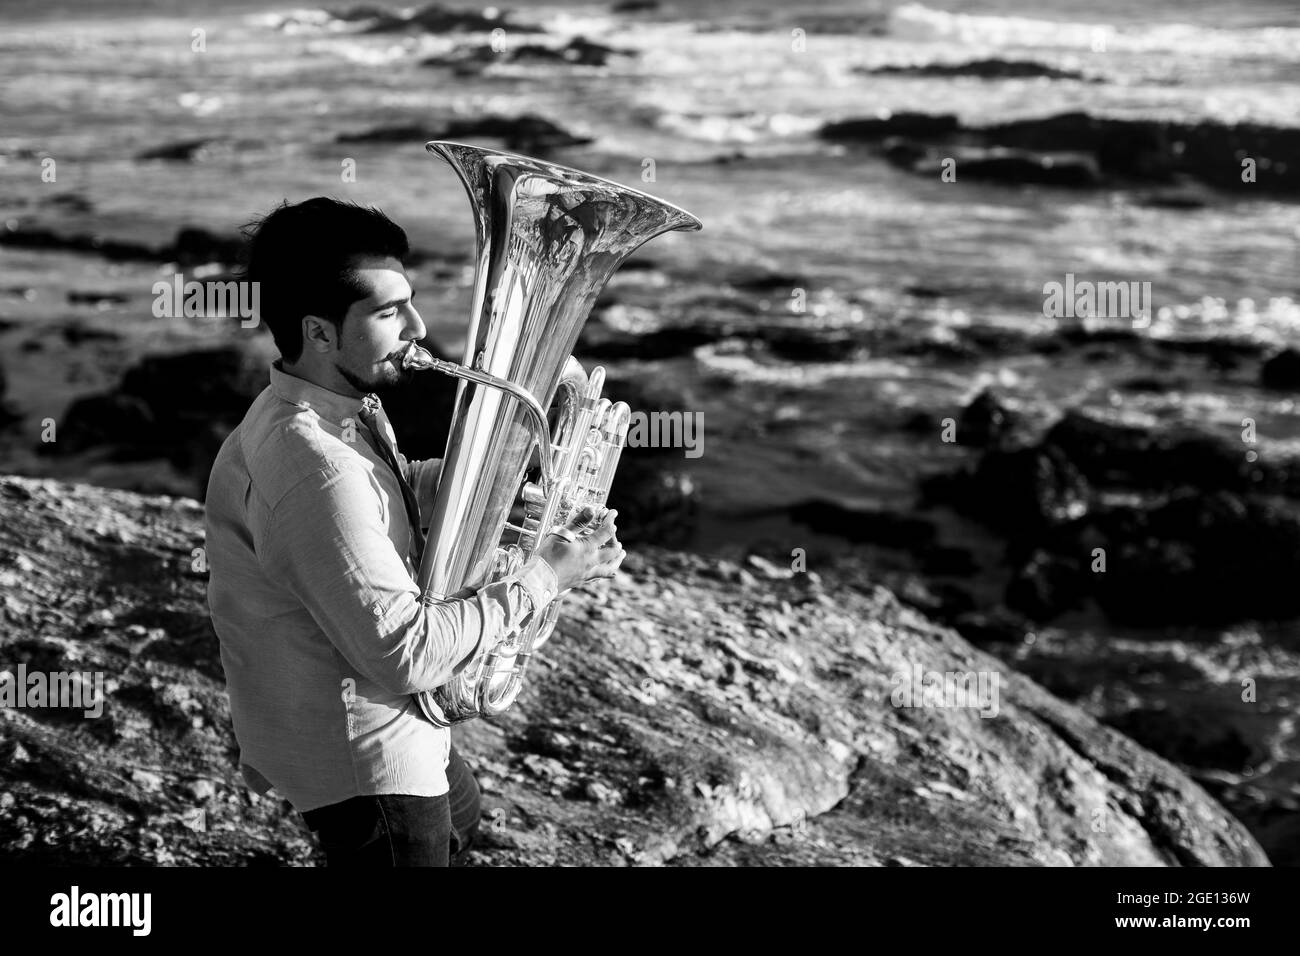 A man performer with a tuba on the seashore. Black and white photo. Stock Photo